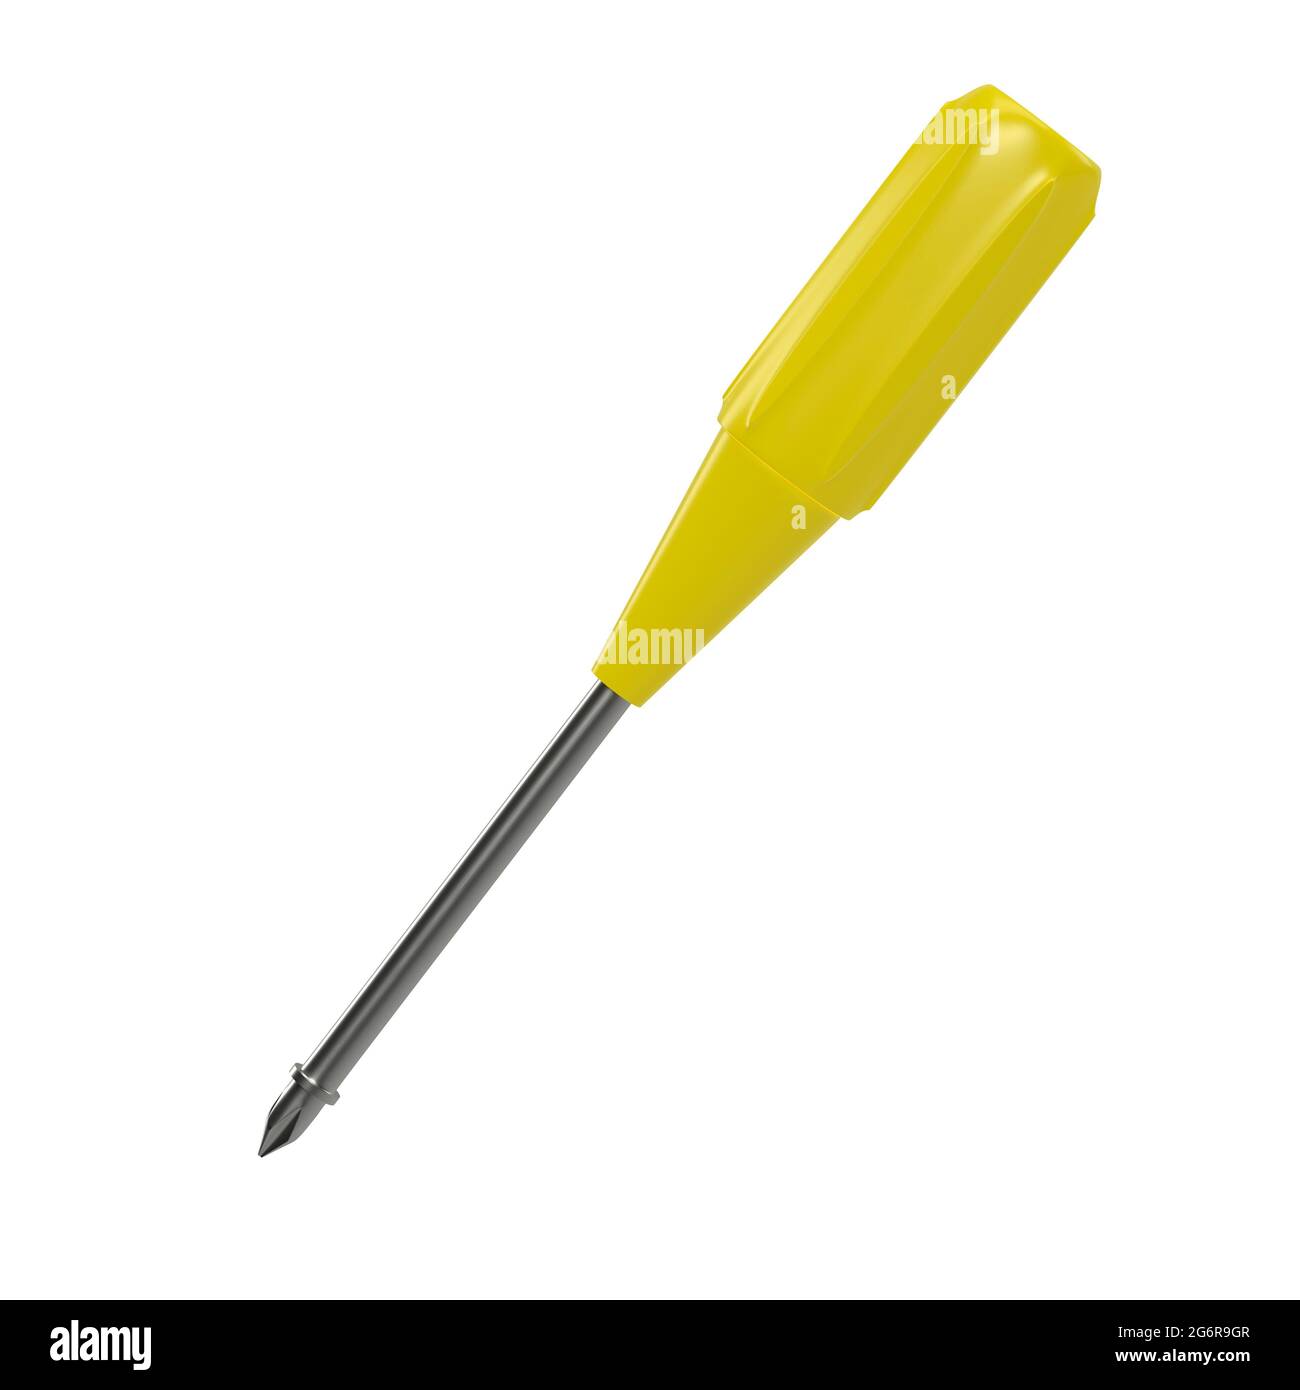 Screwdriver isolated on a white background. 3D rendering Stock Photo